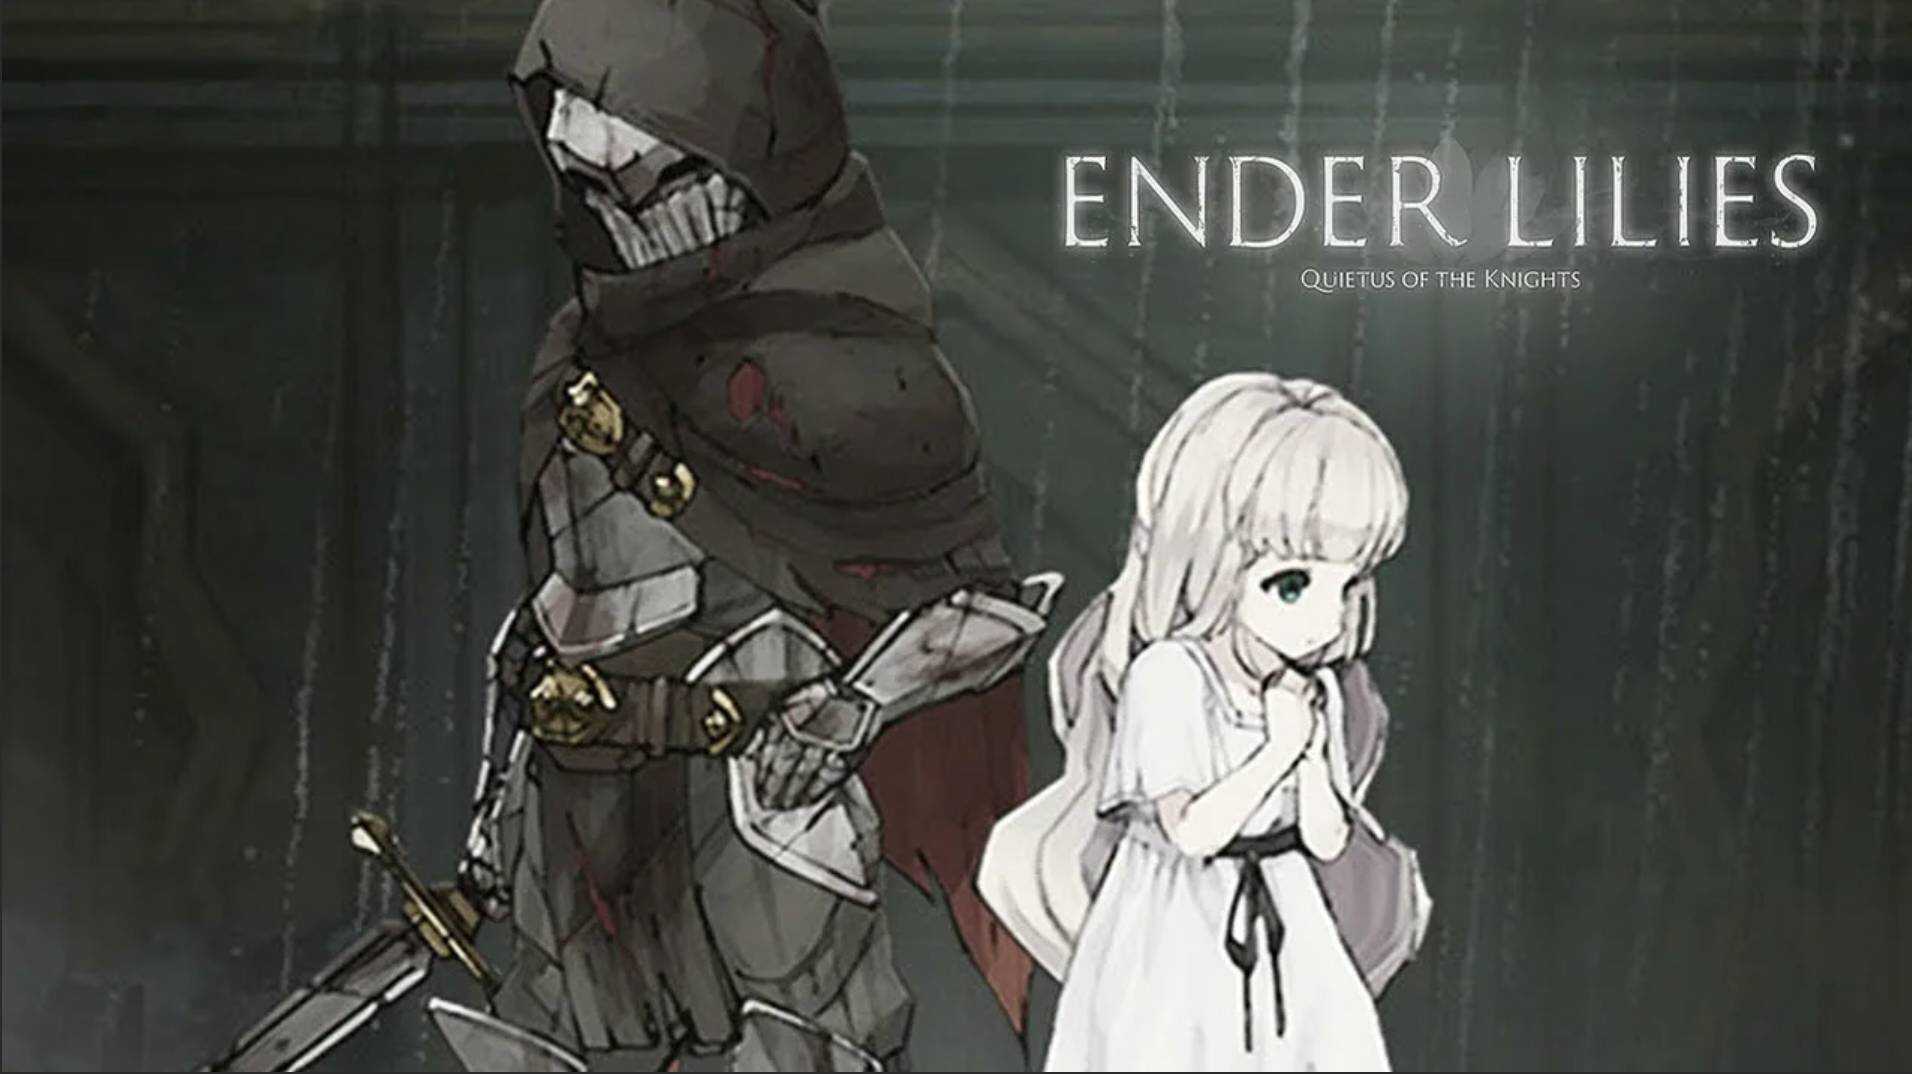 Ender lilies quietus of the knights steam фото 25